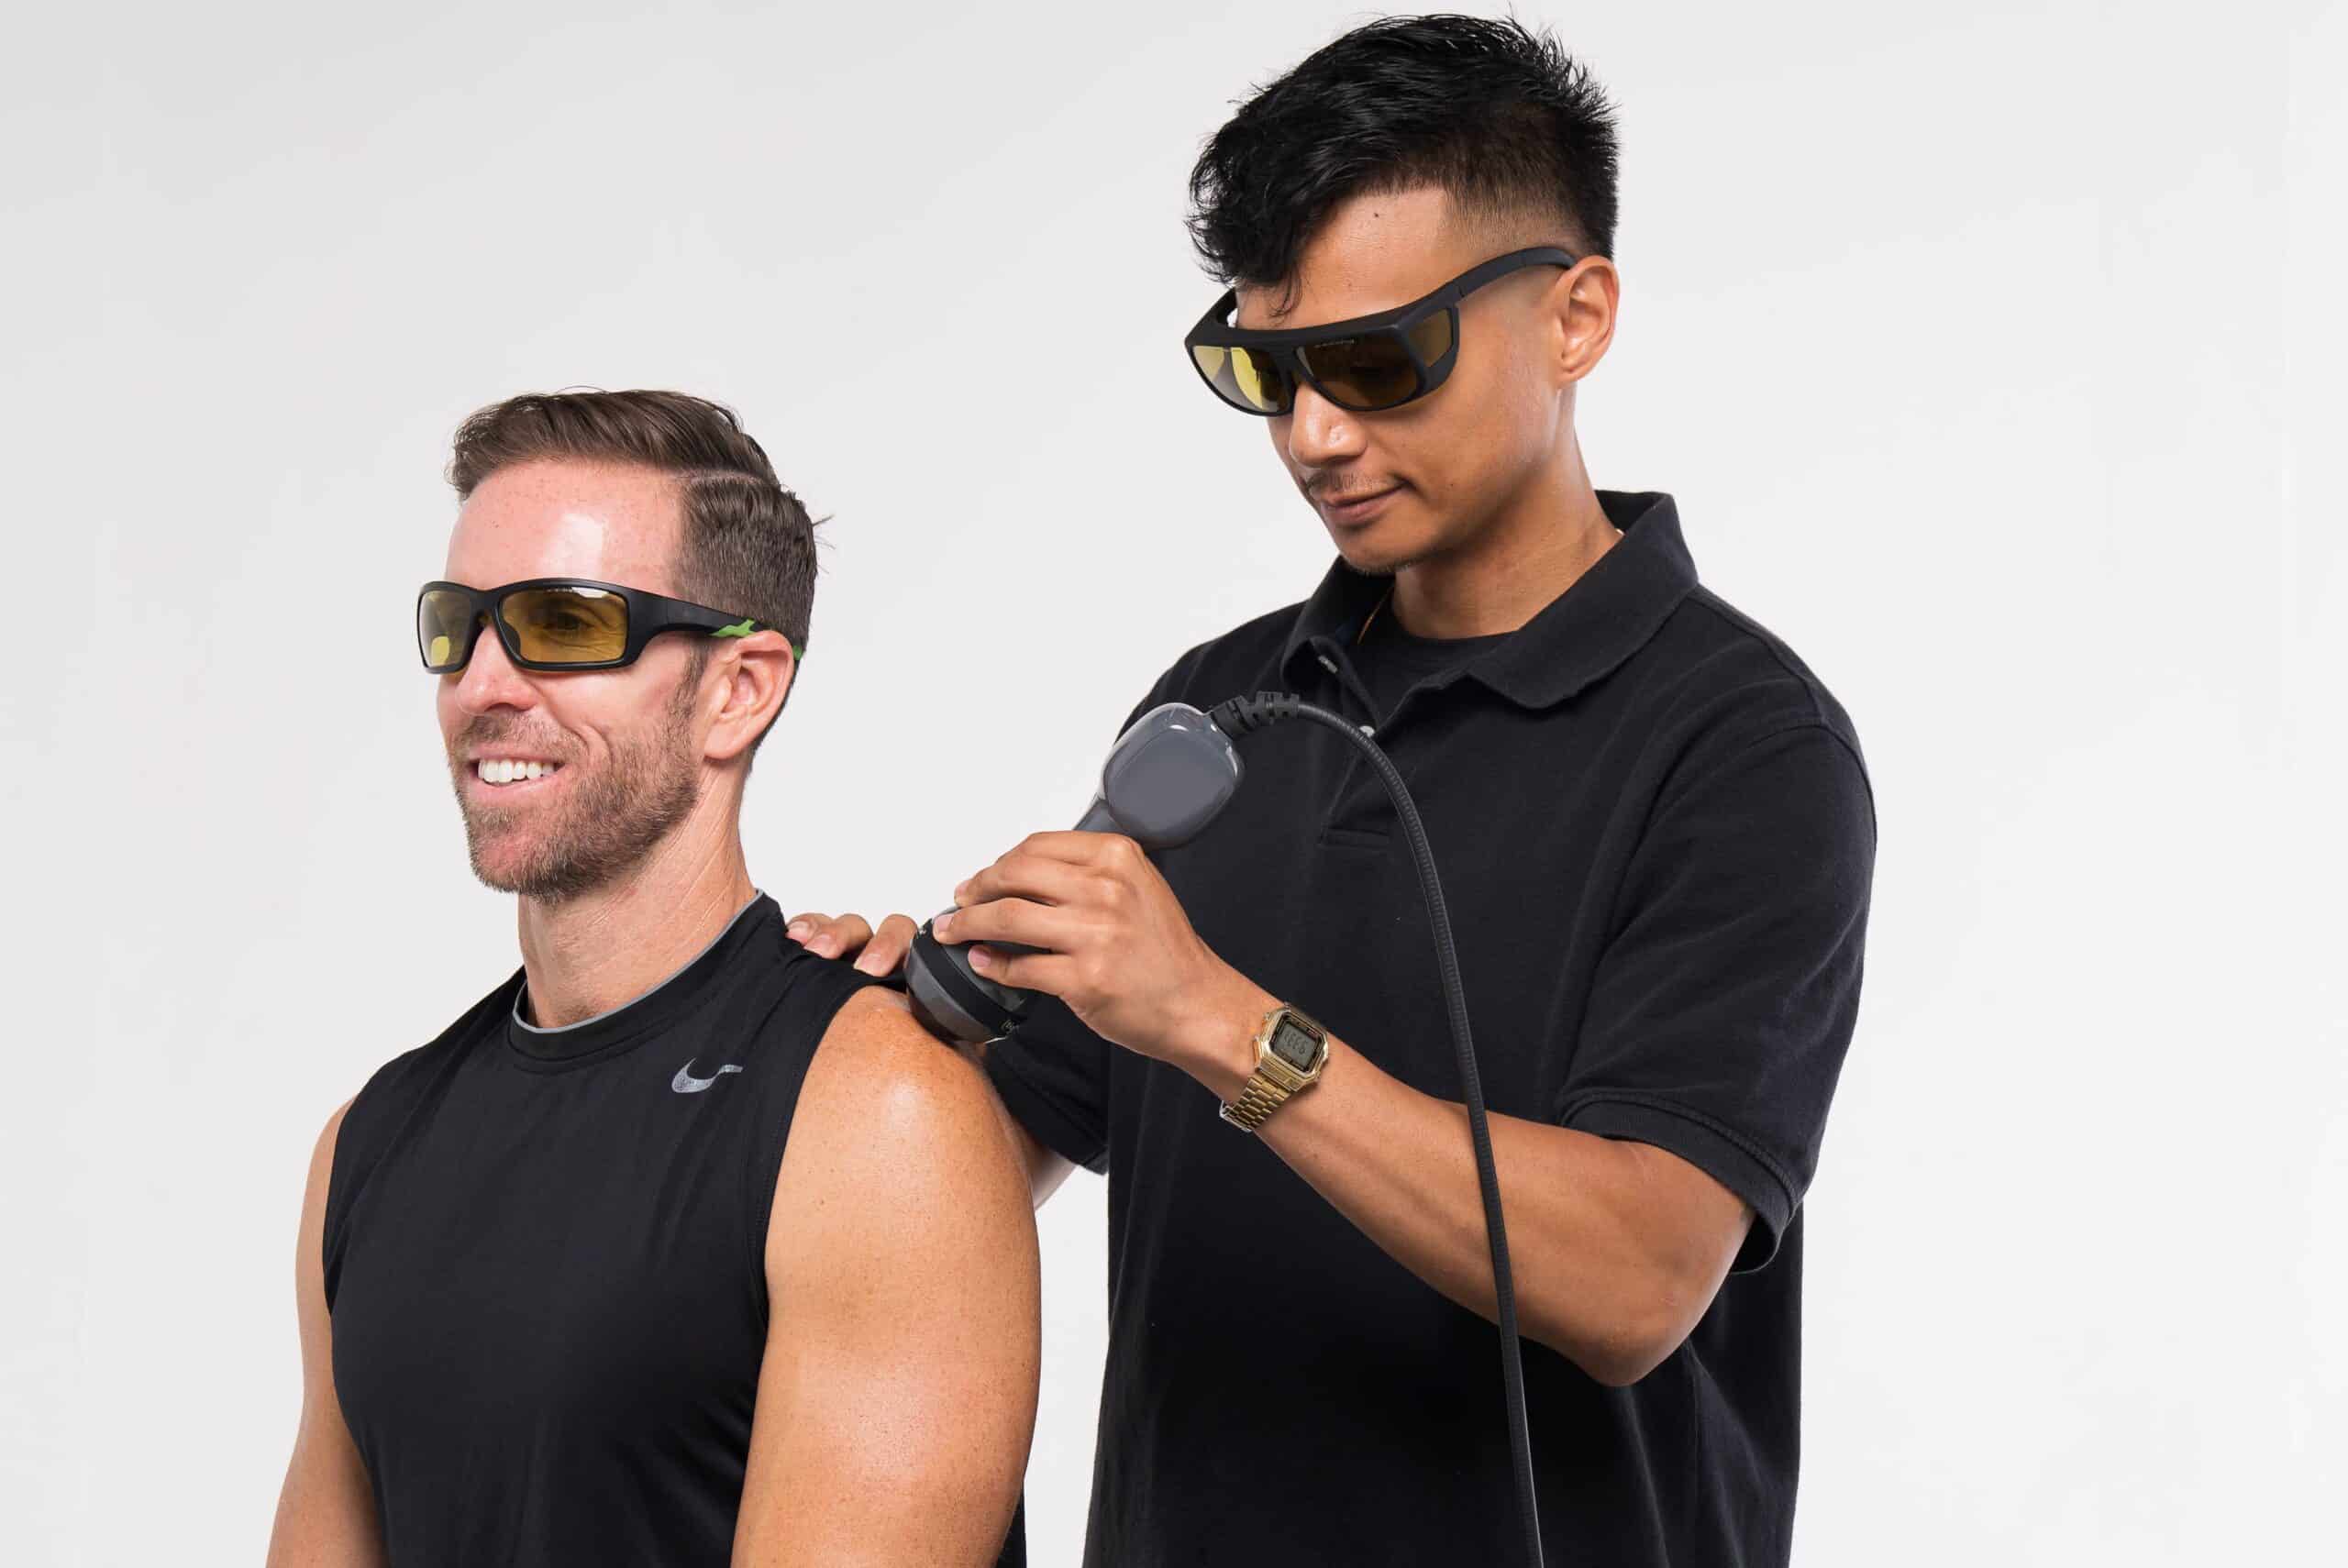 A man is getting his arm shaved by a man wearing sunglasses.